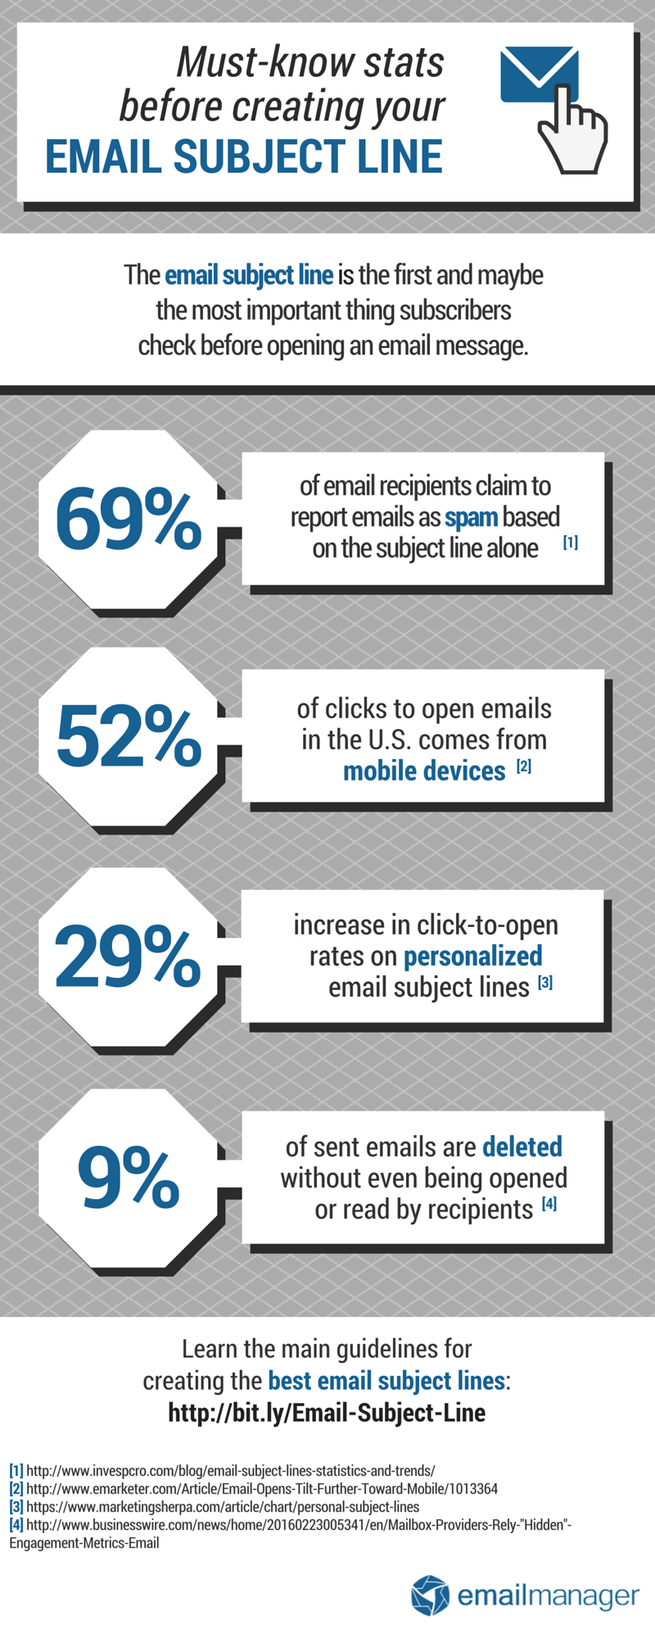 Infographic: Must-know stats before creating your email marketing subject line | Emailmanager blog